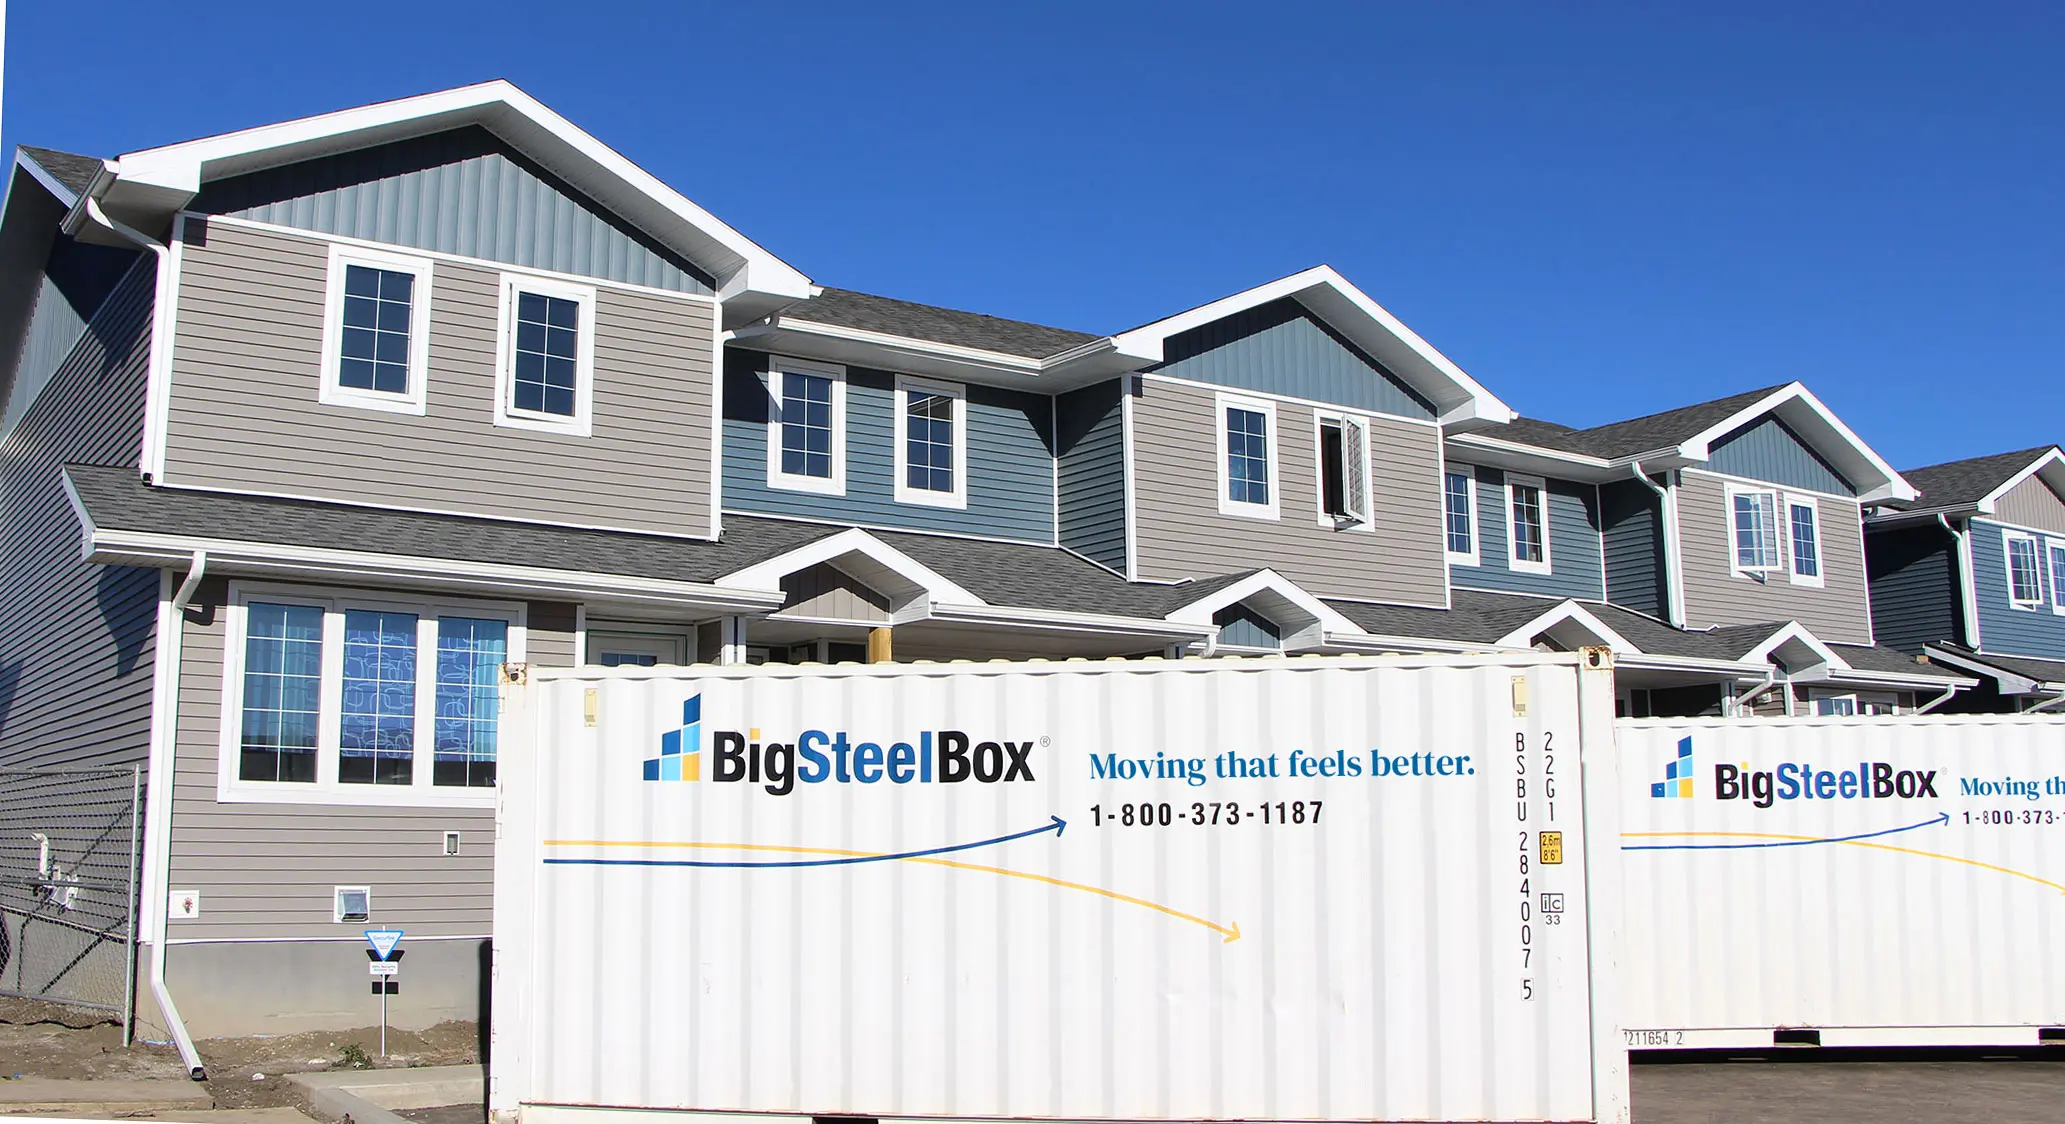 BigSteelBoxes on at Habitat for Humanity community